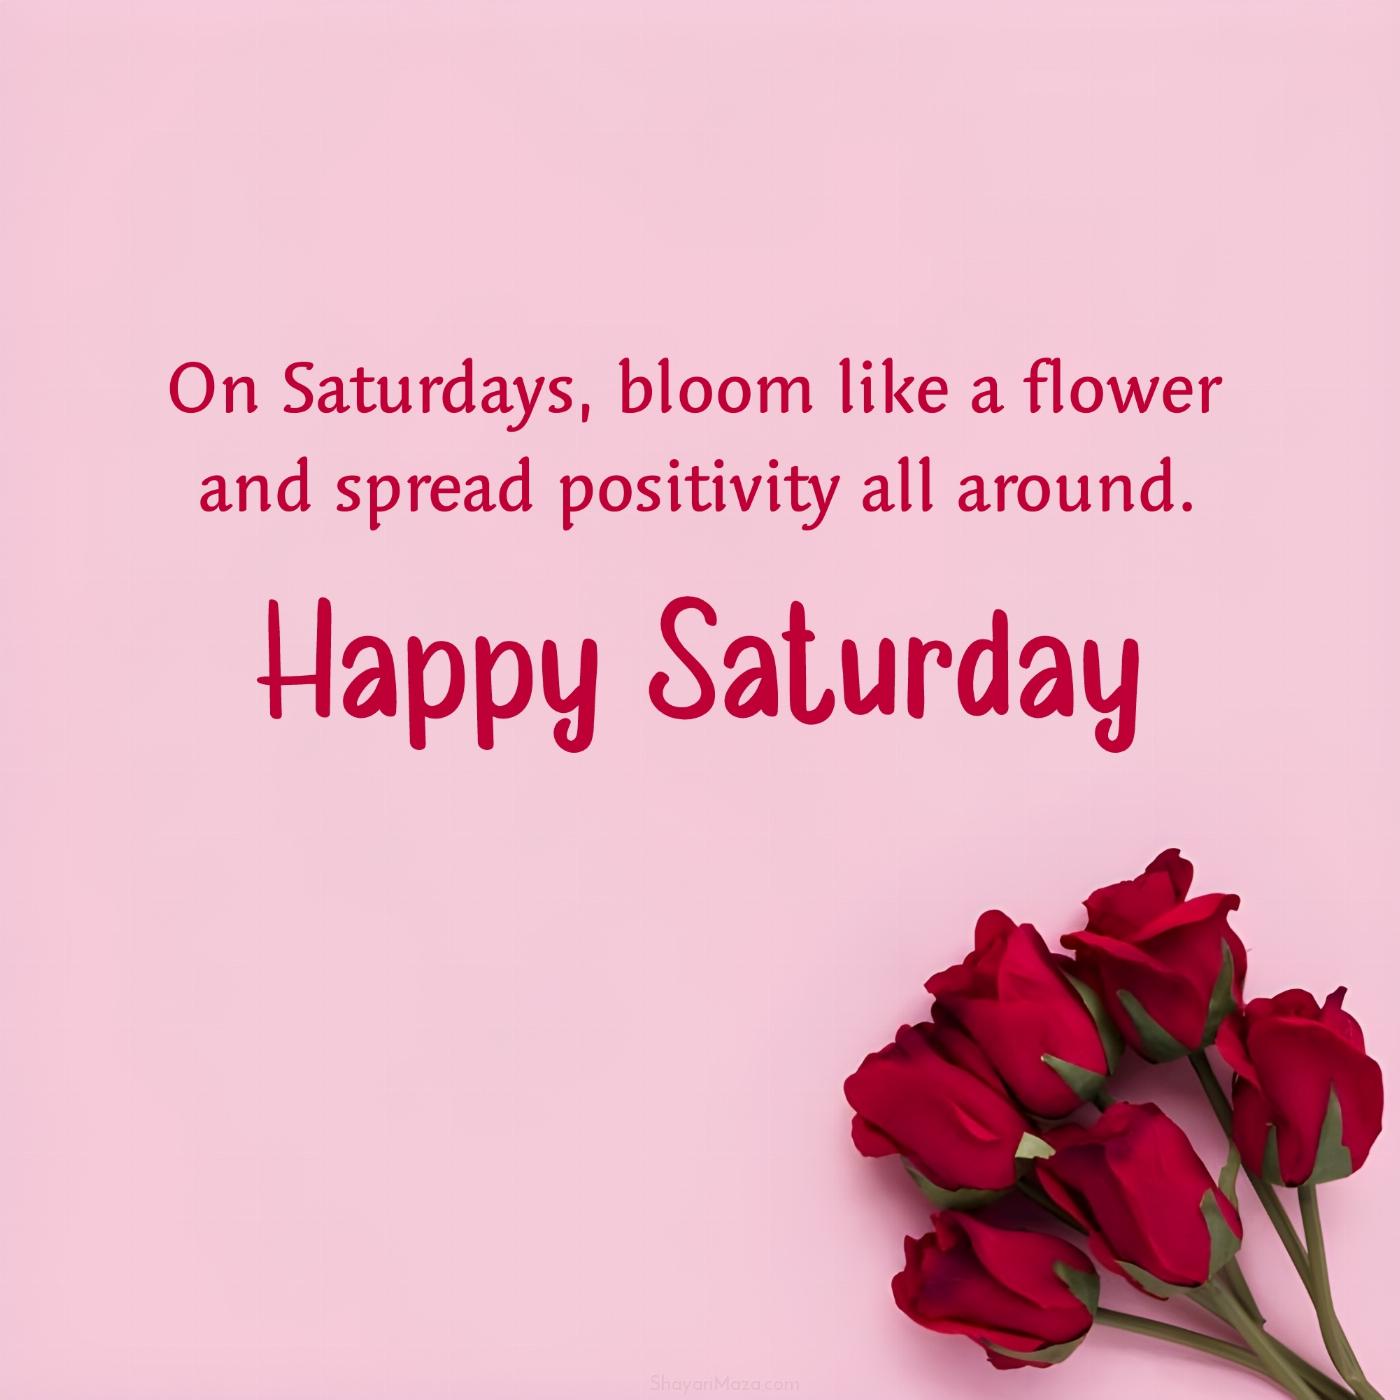 On Saturdays bloom like a flower and spread positivity all around